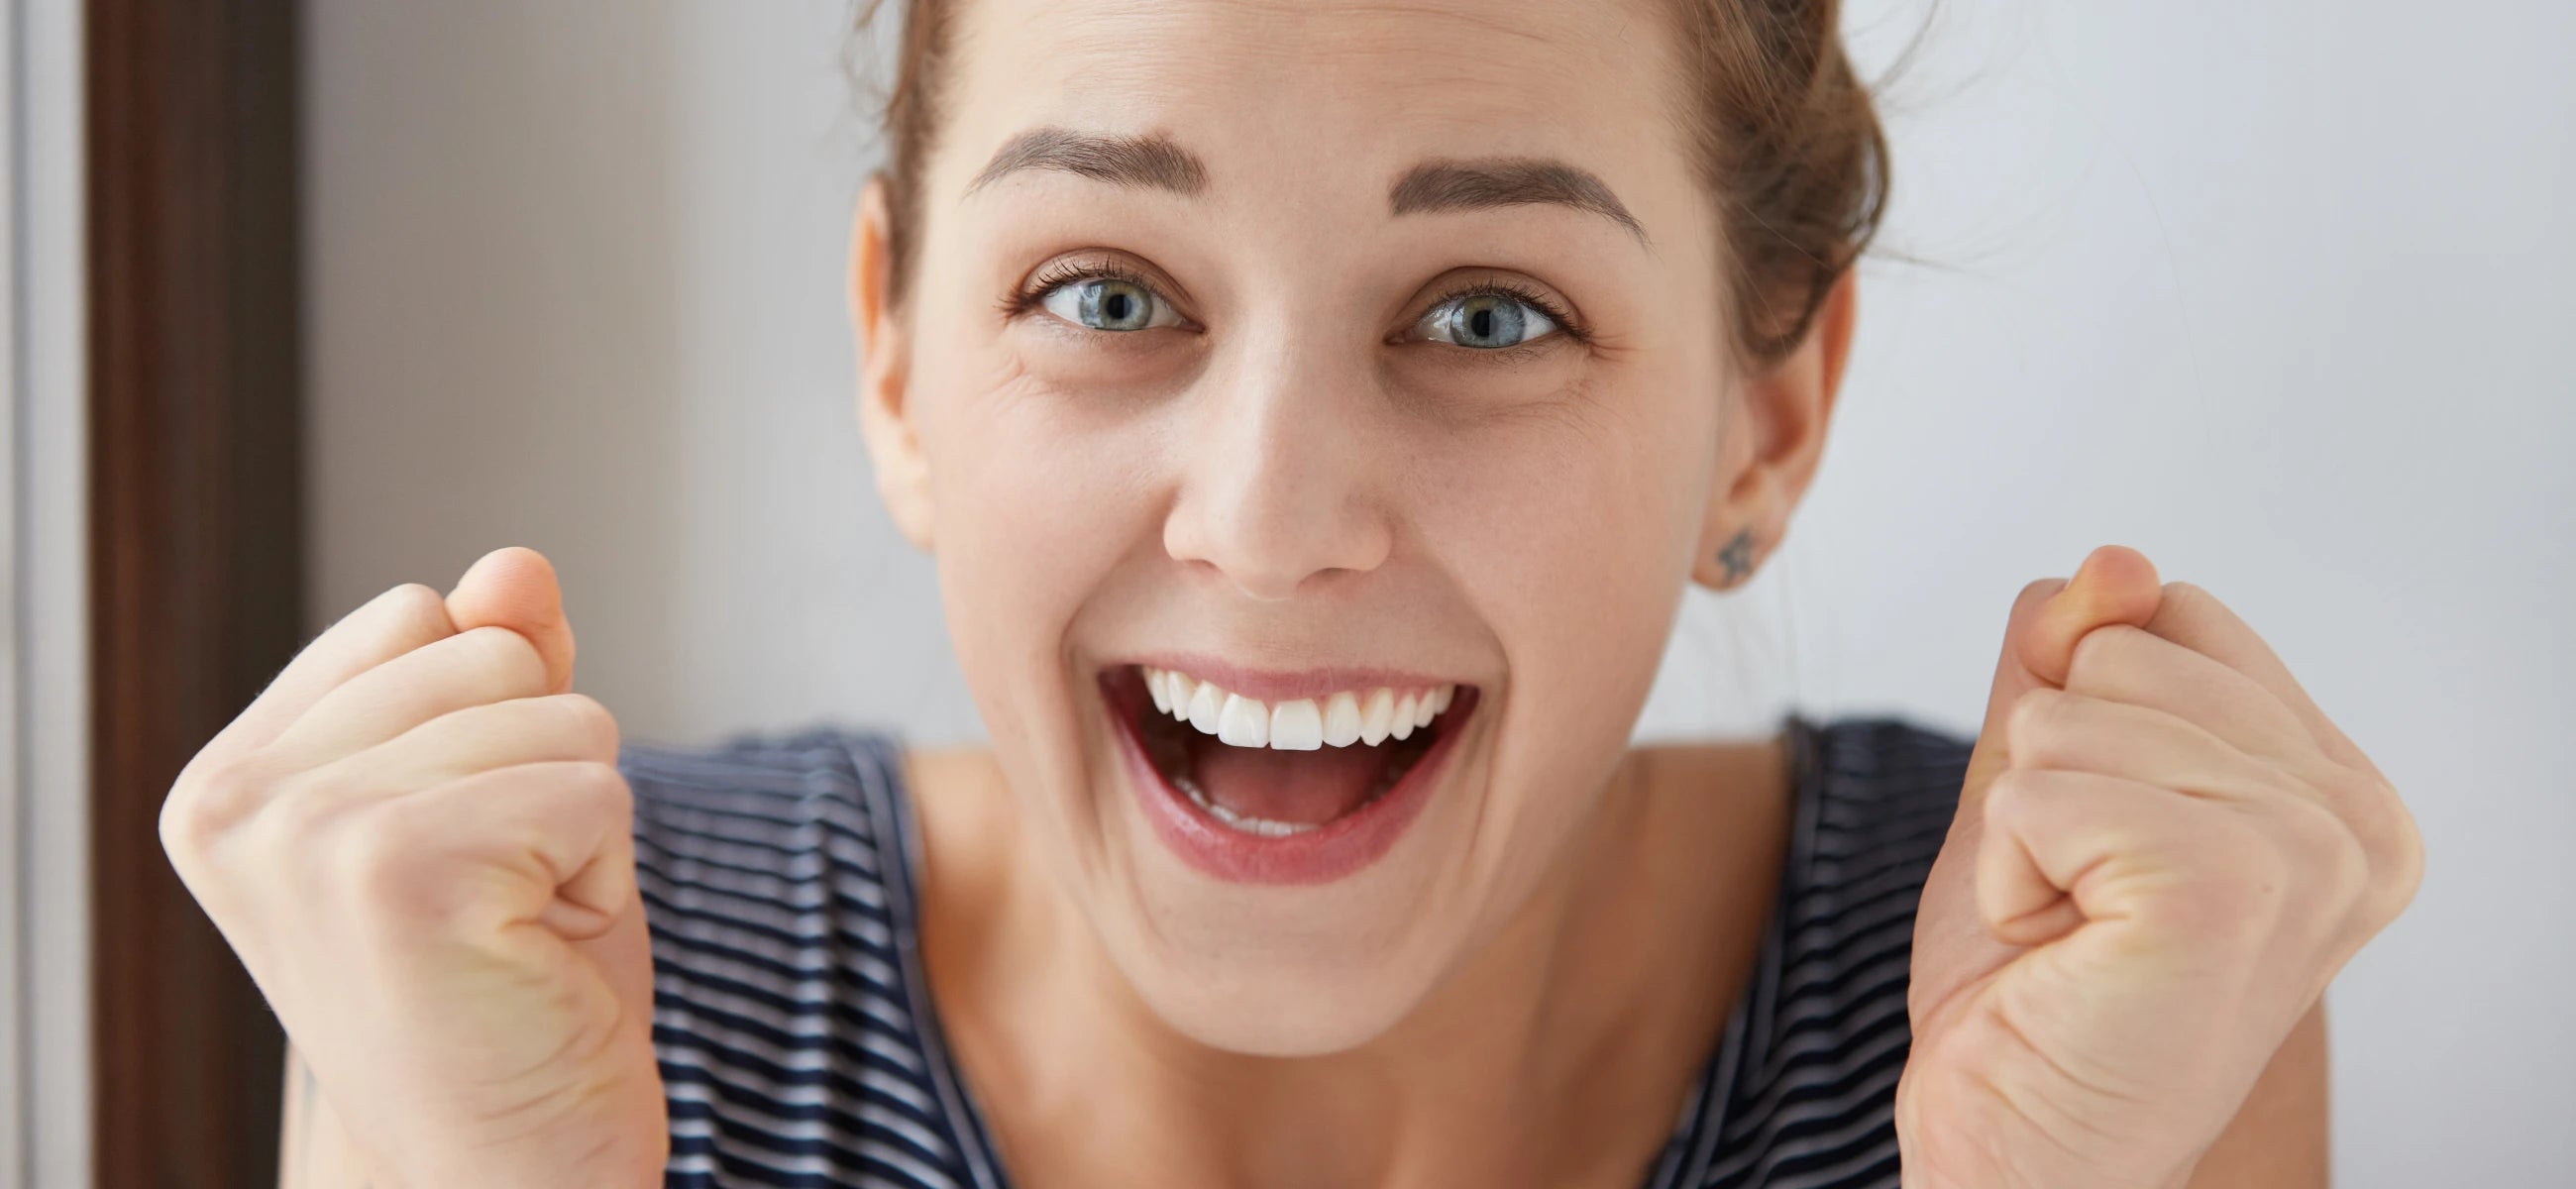 How to straighten teeth: 5 options to consider for the smile of your dreams